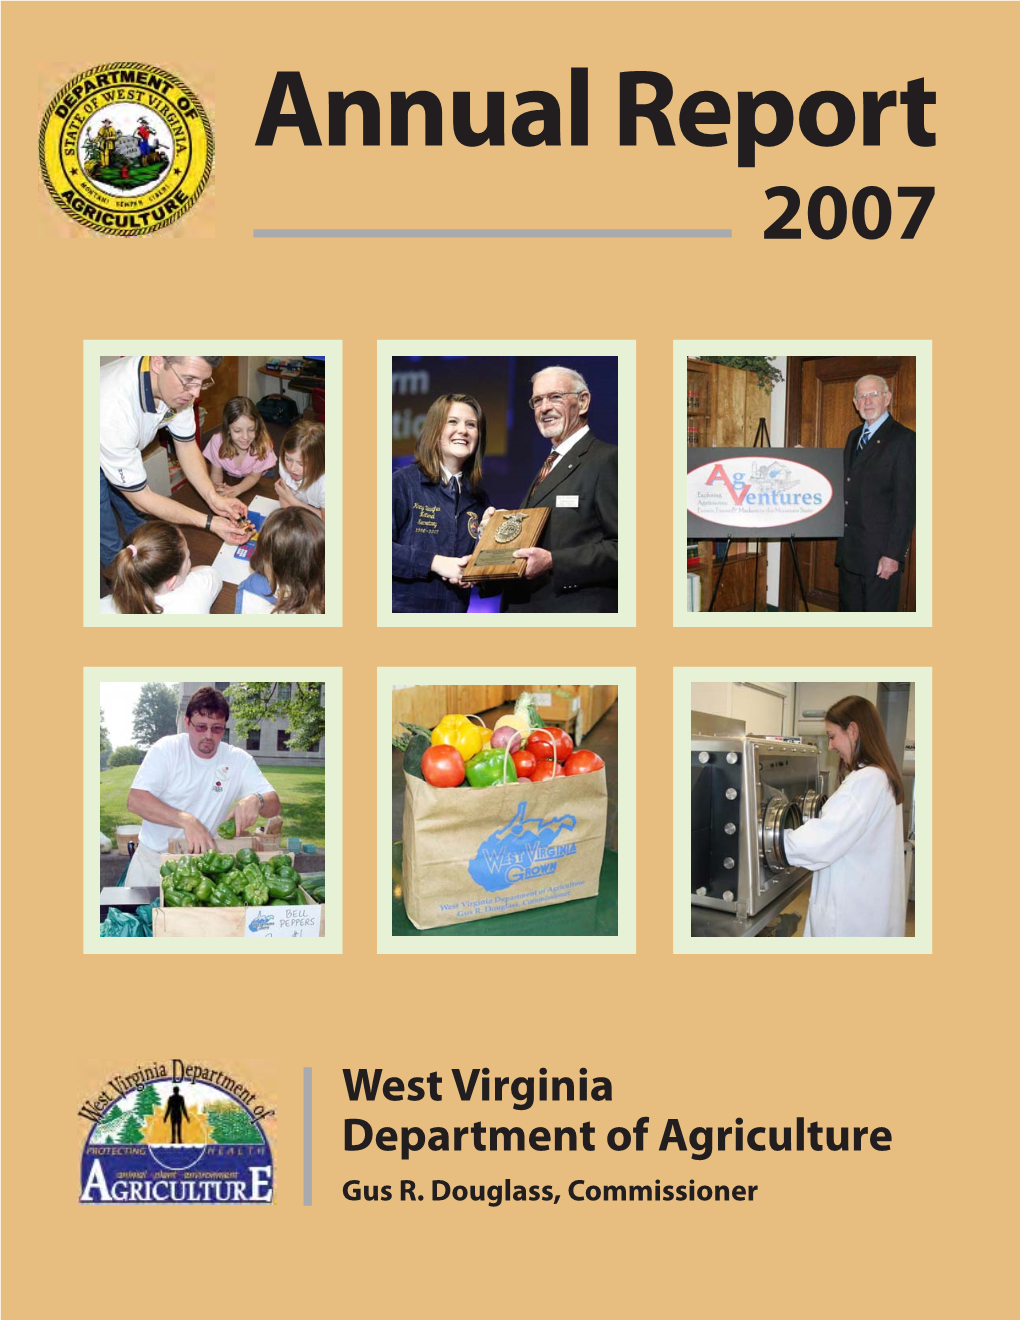 West Virginia Department of Agriculture Gus R